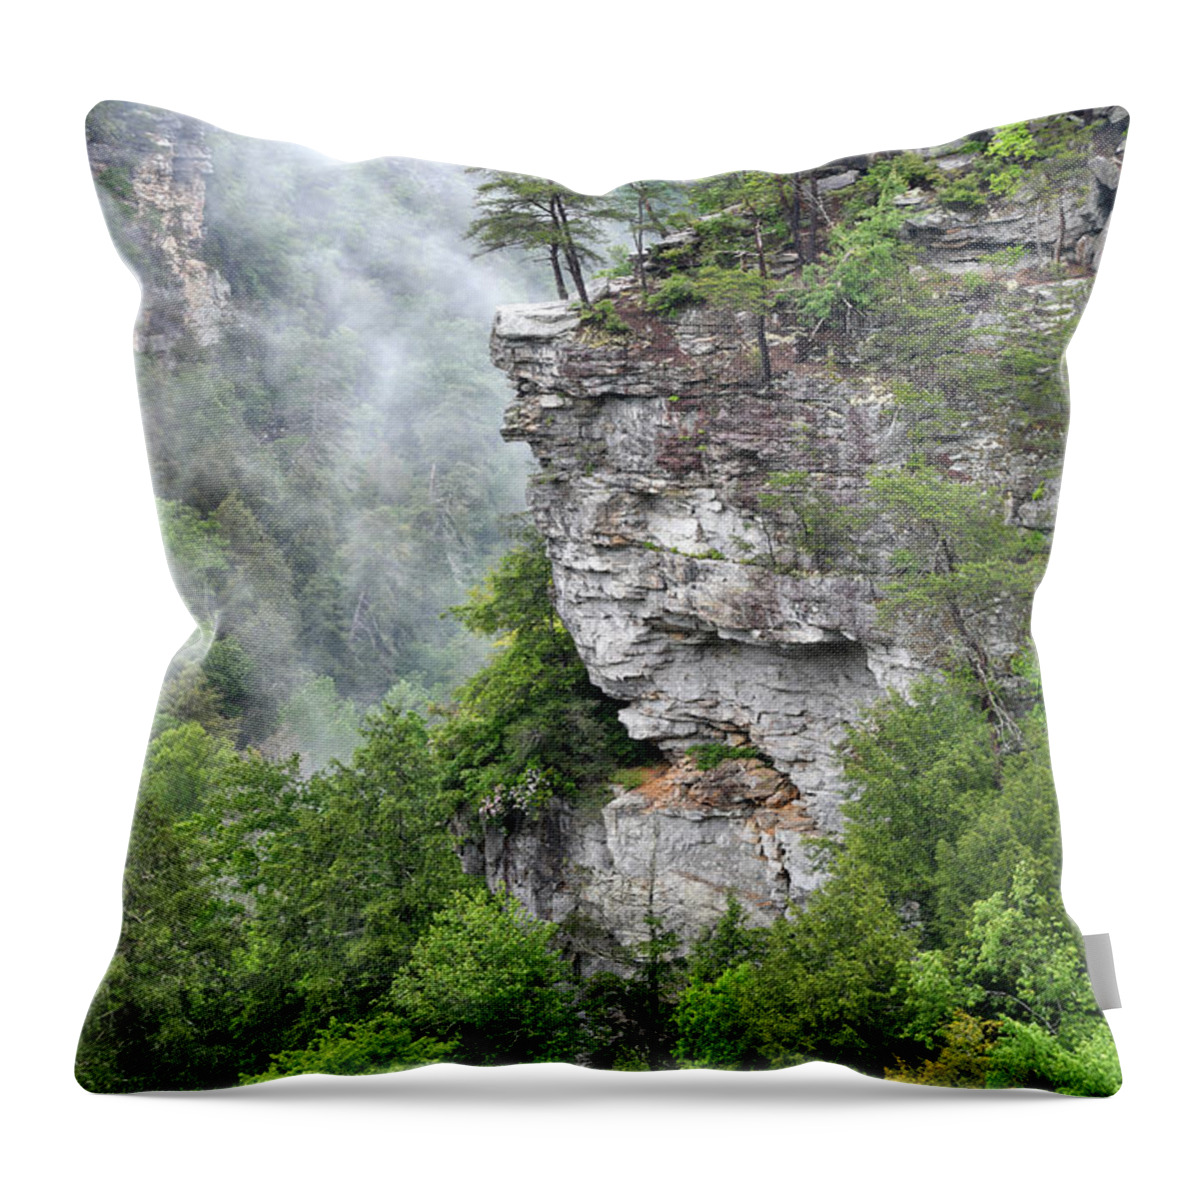 Fall Creek Falls Throw Pillow featuring the photograph Fog In The Valley by Phil Perkins